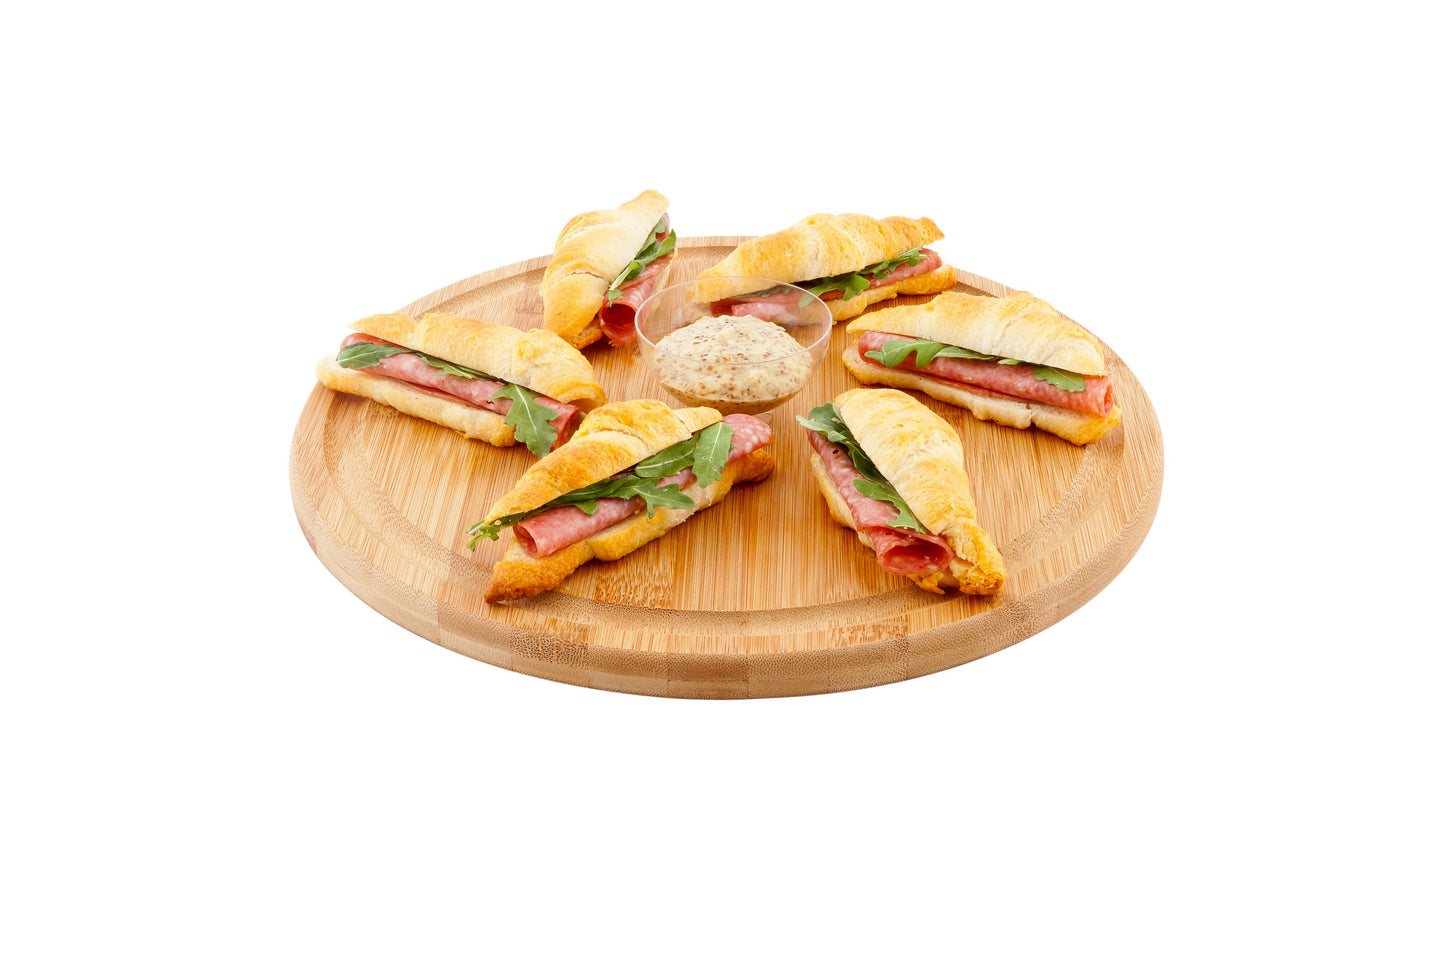 Round Bamboo Serving Board 30.48 cm 1 count box